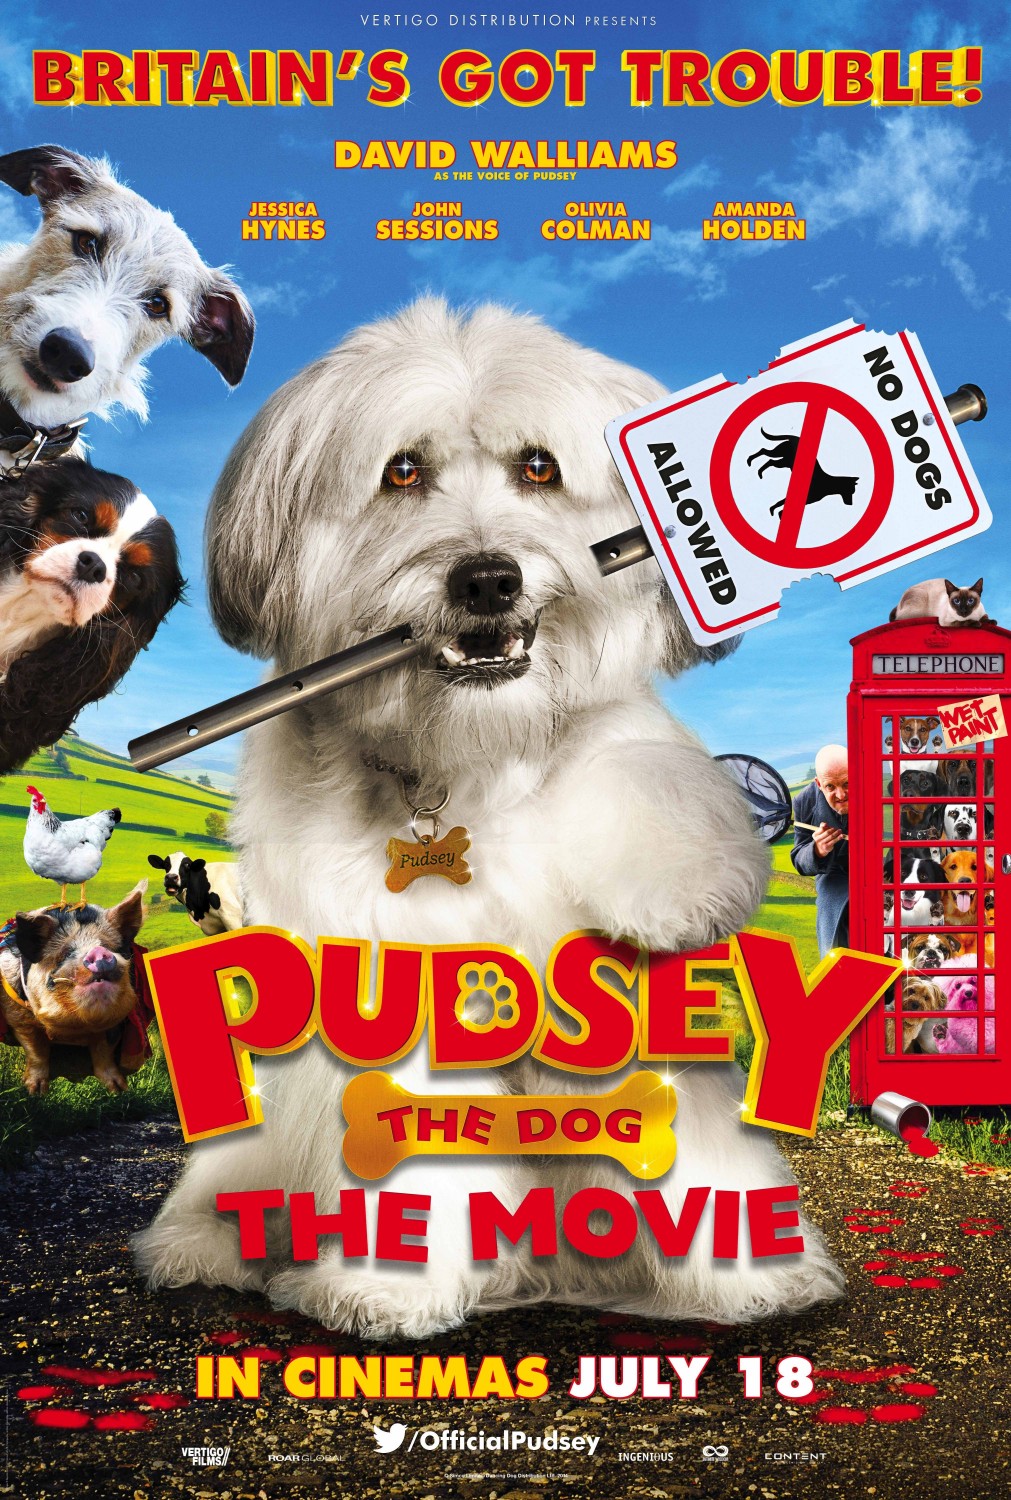 Extra Large Movie Poster Image for Pudsey the Dog: The Movie 